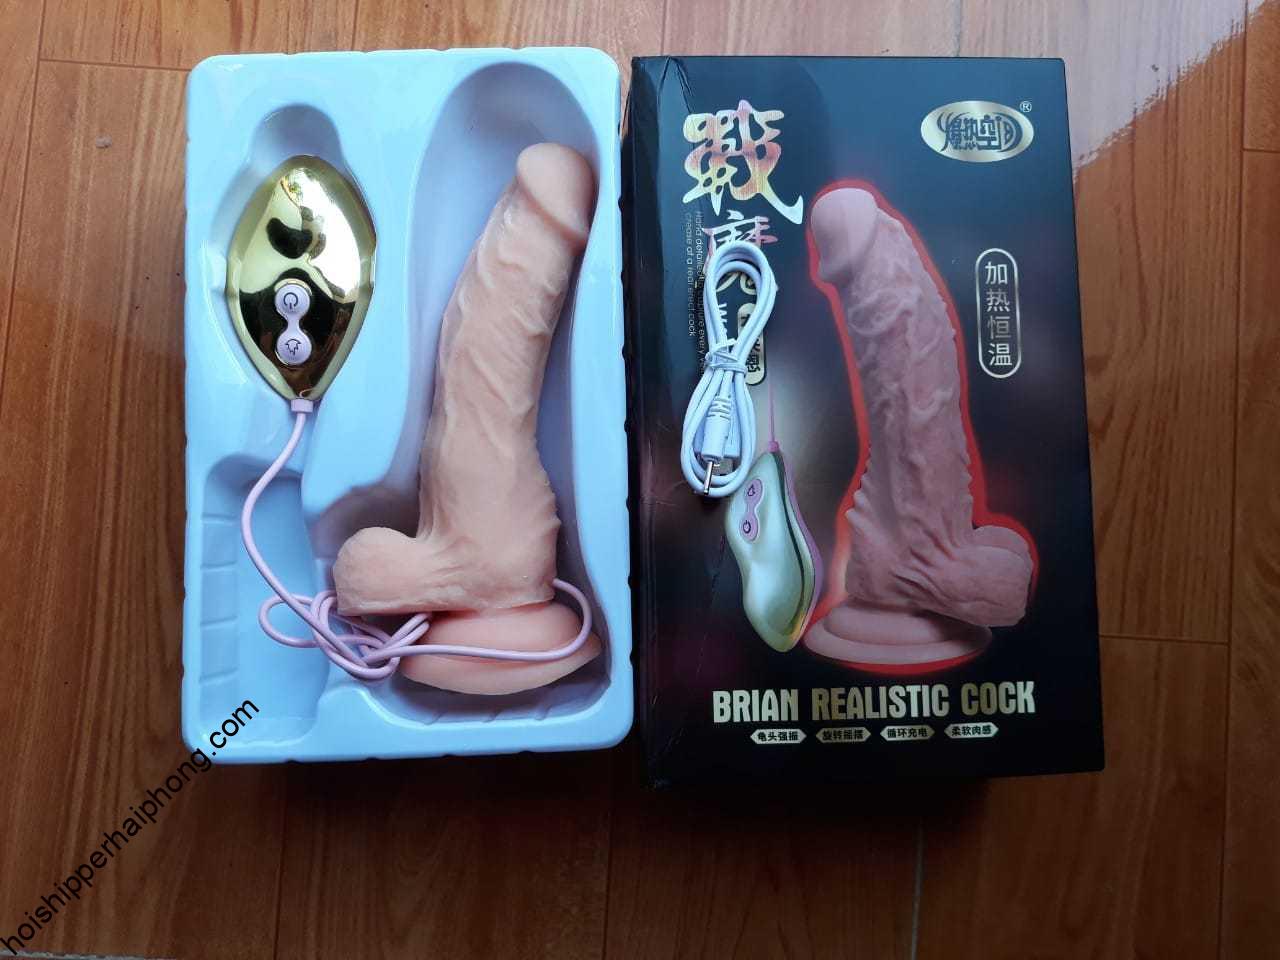 Duong vat gia brain realistic cock rung ngoay cuc manh phat nhiet-shopthanhtung